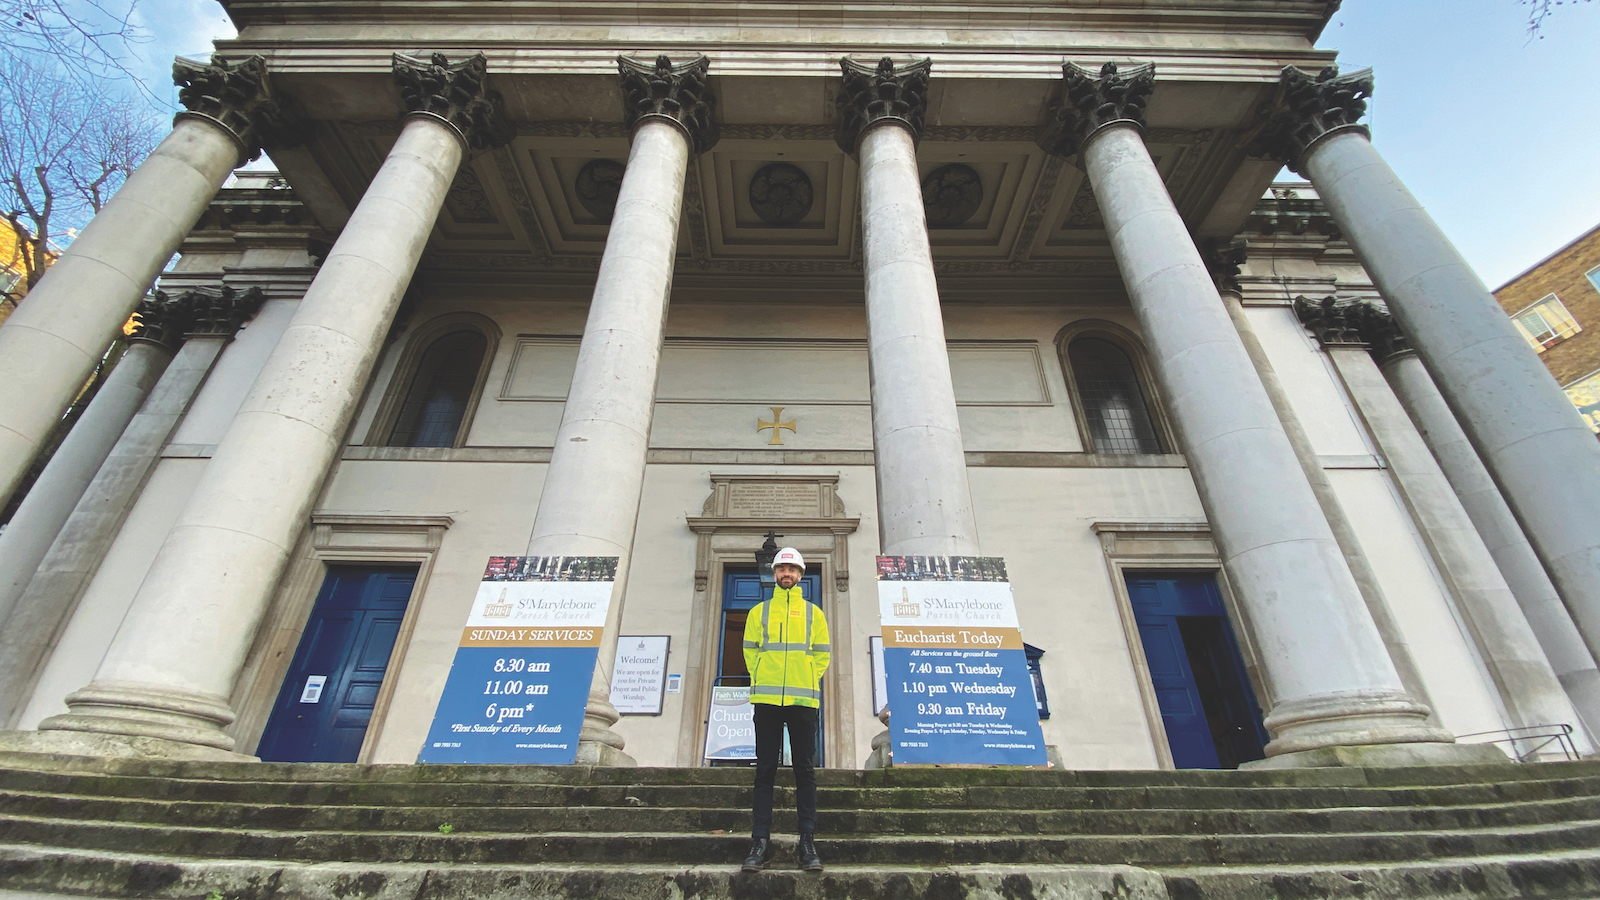 Pictured outside St Marylebone Parish Church, Samuel Wilson represents the new generation of skilled tradespeople. A former apprentice, currently SRM package manager, he is studying with the Building Crafts College to combine heritage skills with his knowledge of MMCs and 3D modelling